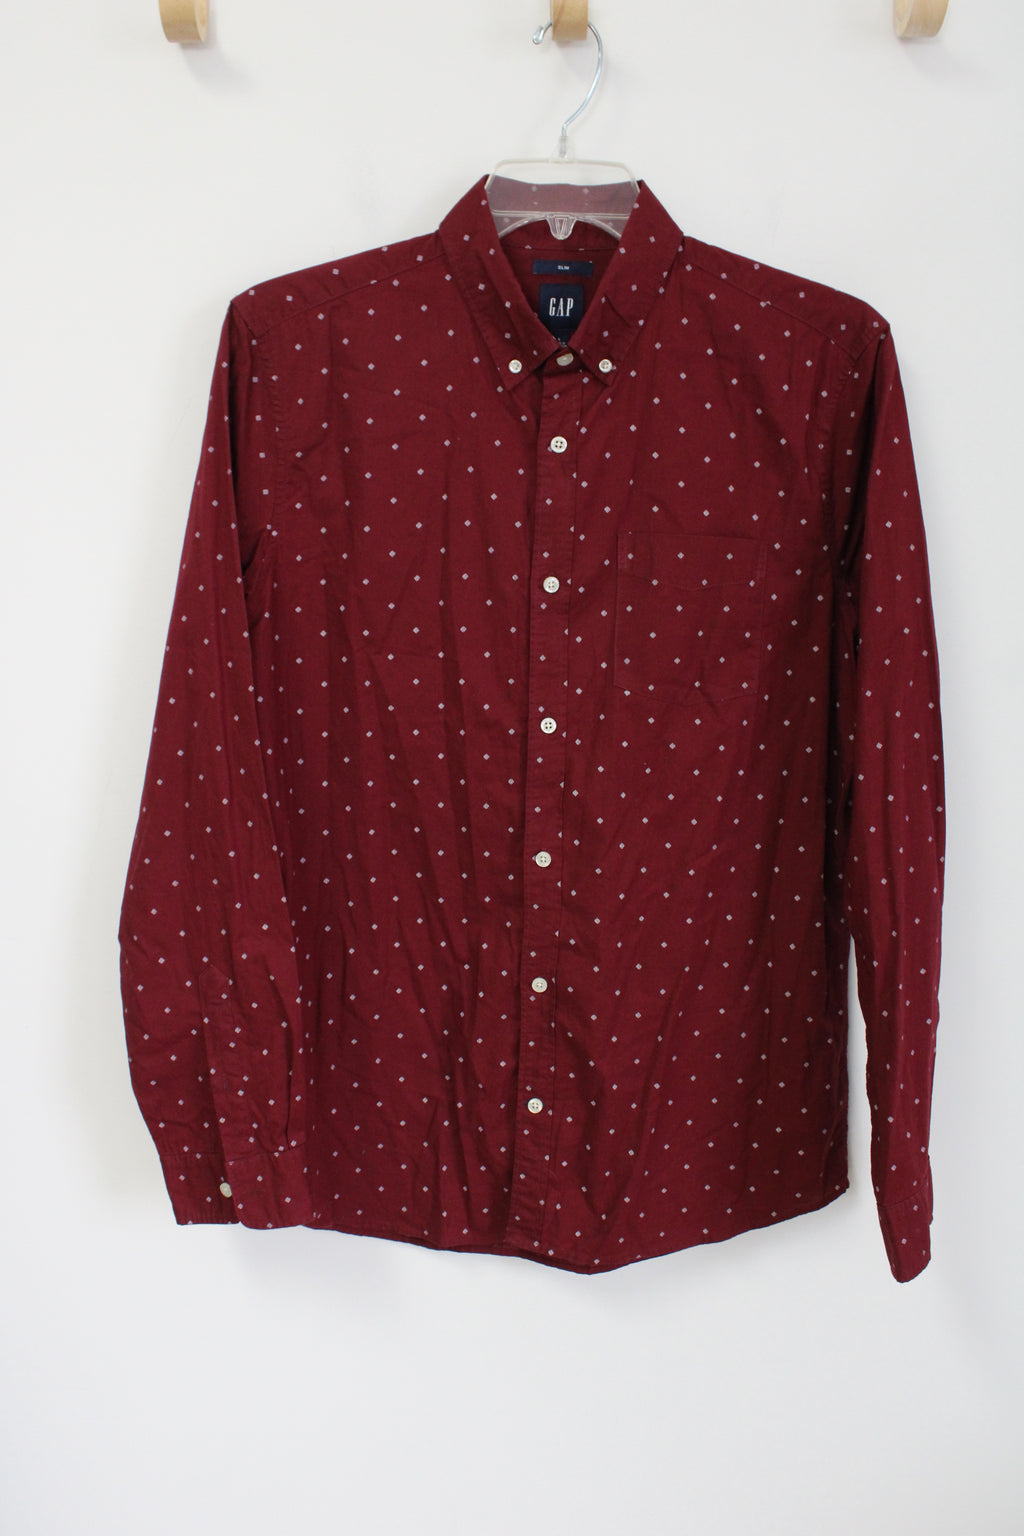 Gap Slim Fit Maroon Patterned Button Down Shirt | L